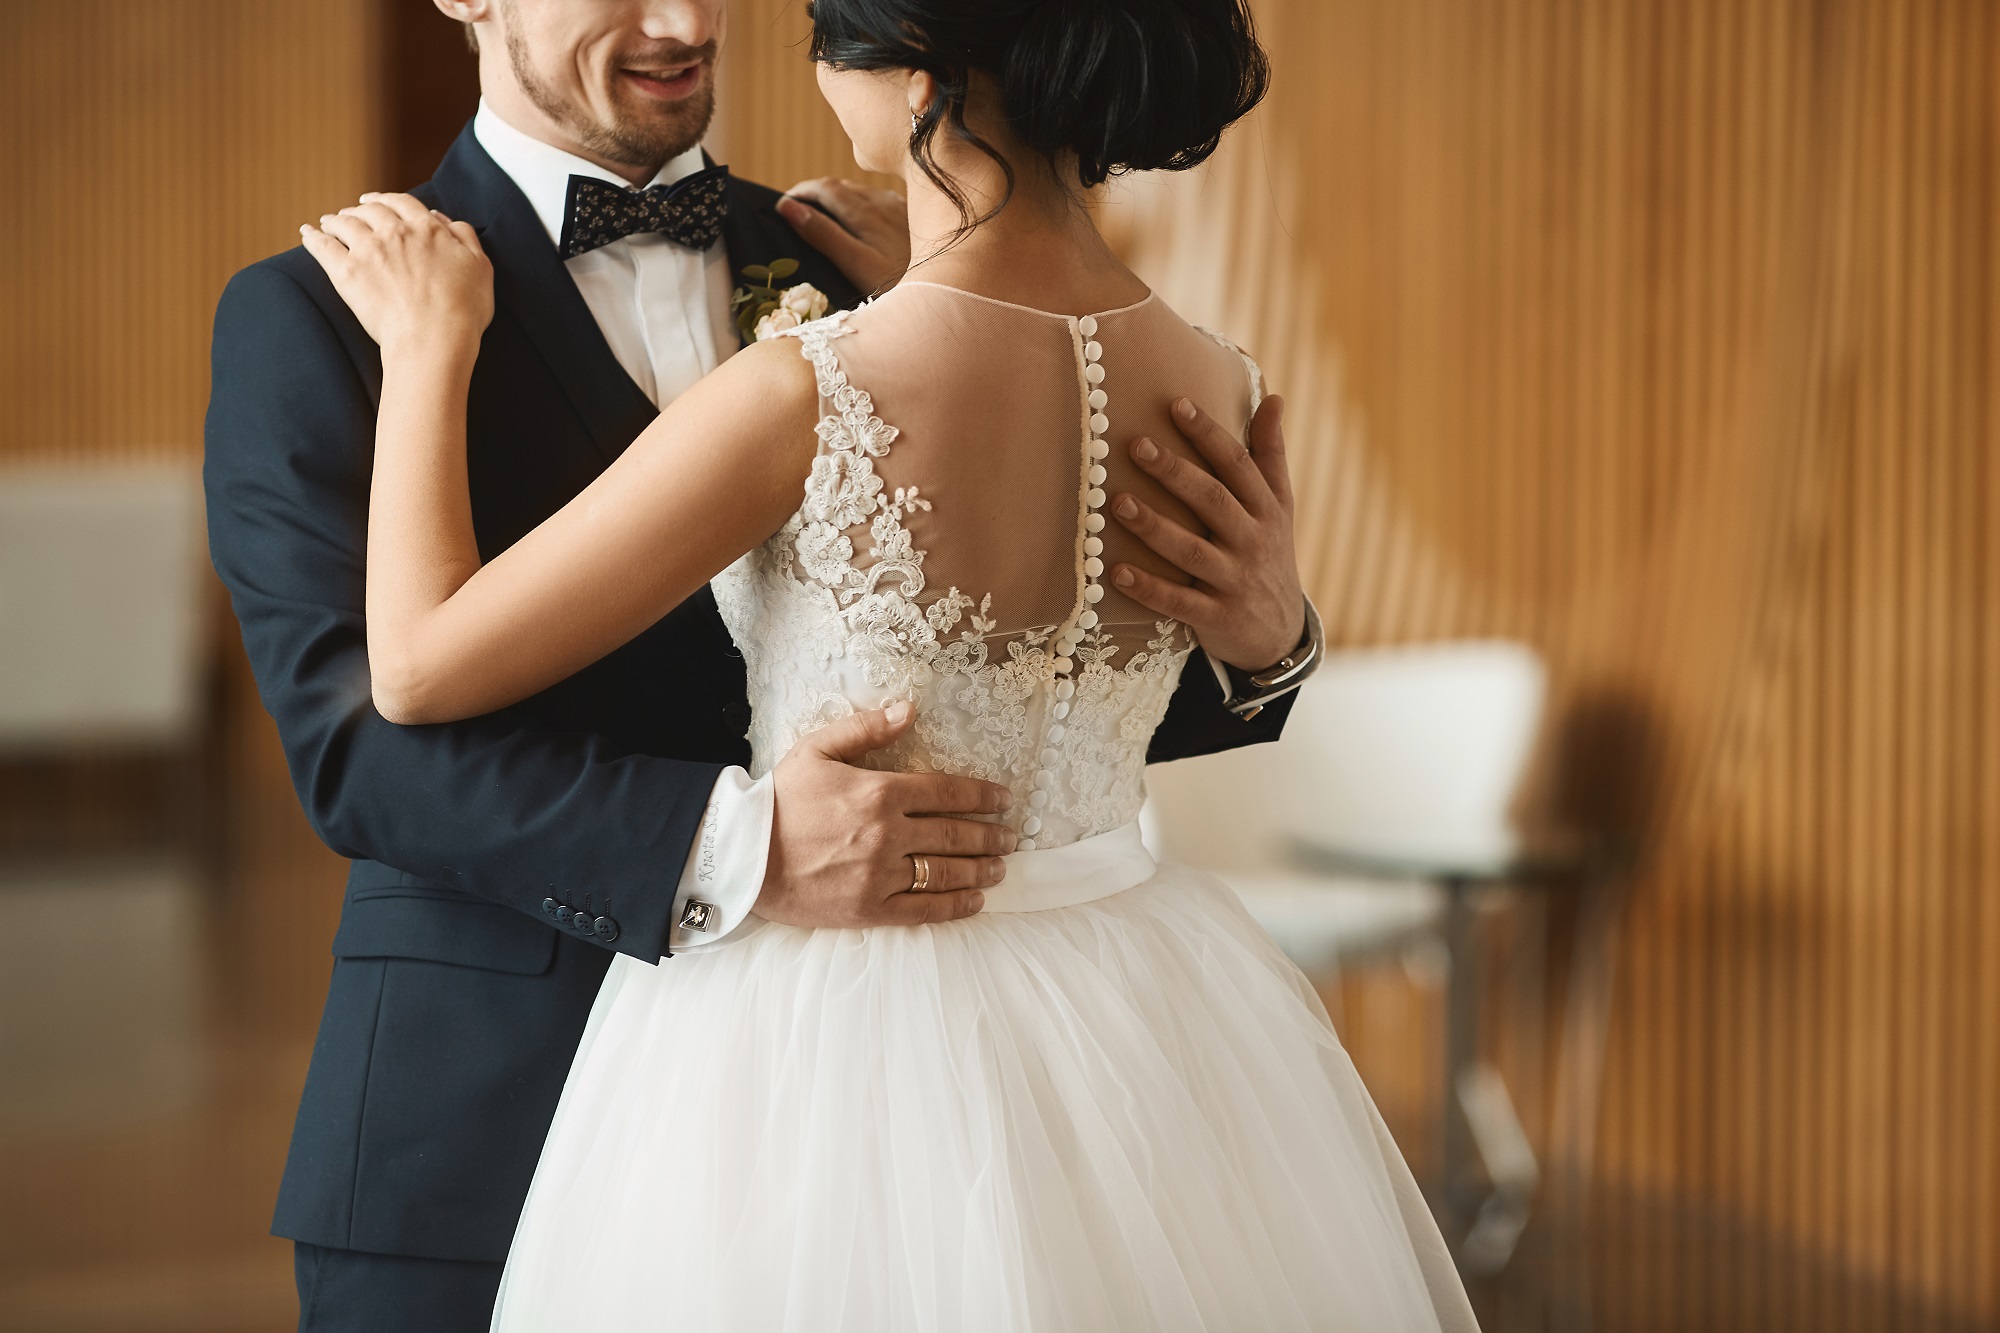 Top Dry Cleaning Wedding Dress Prices of the decade Learn more here 